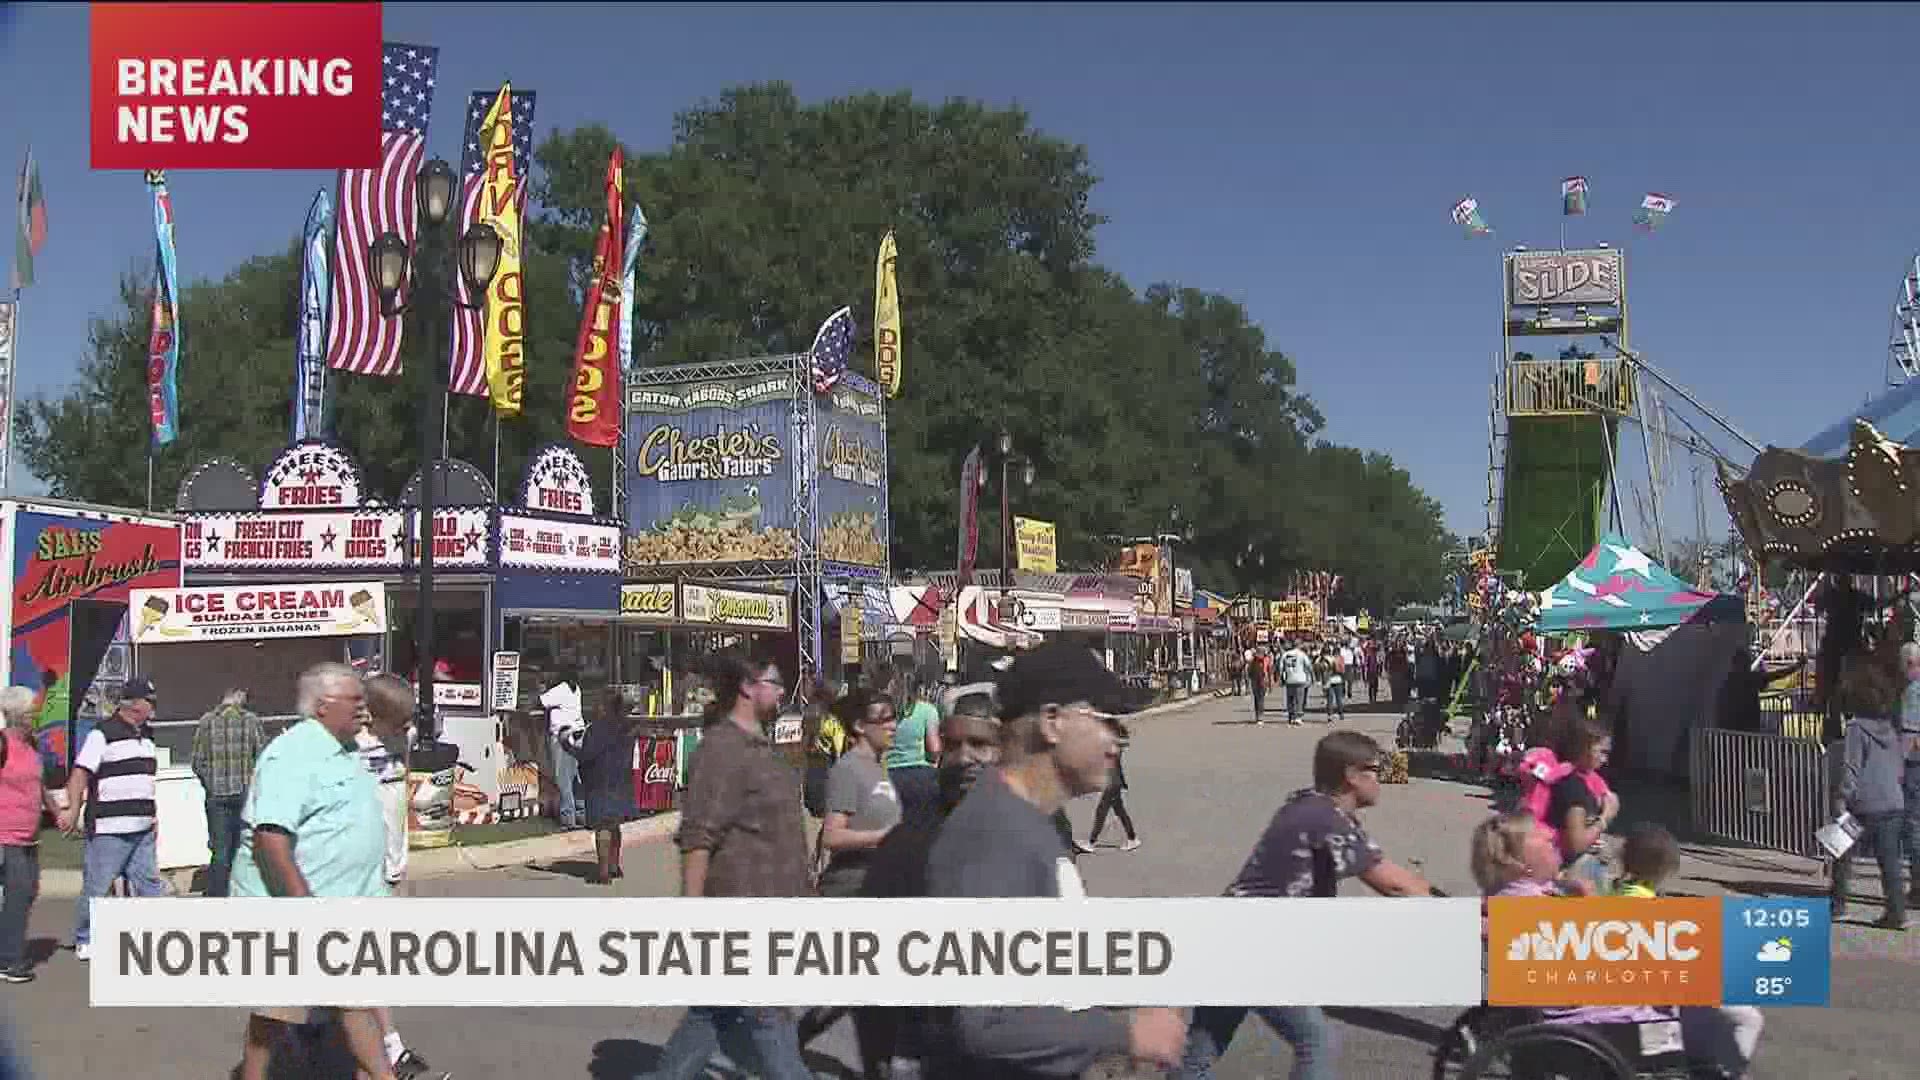 For the first time since World War II, the North Carolina State Fair has been canceled due to concerns over COVID-19.